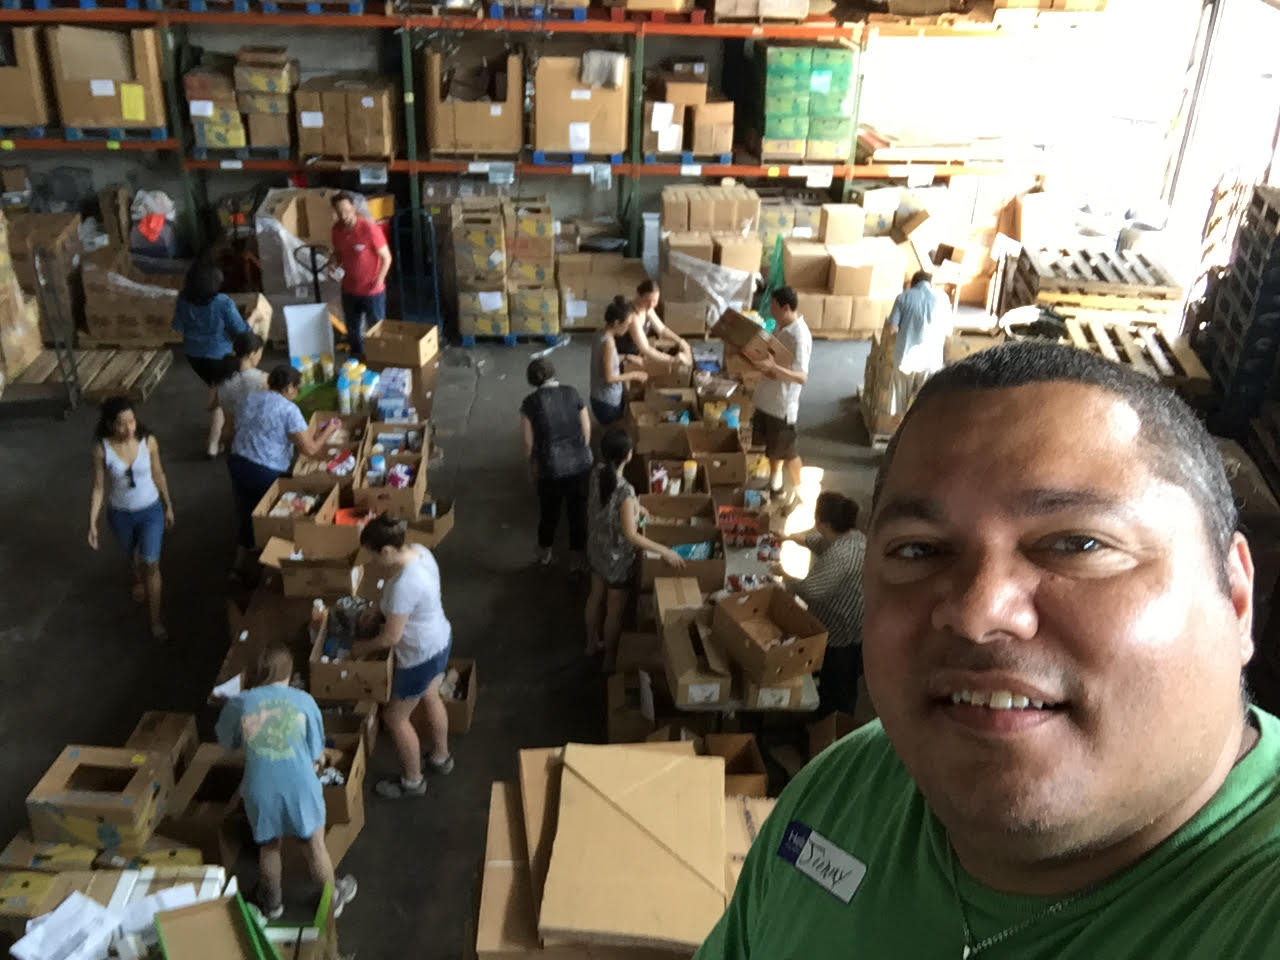 Jimmy Badillo with others packing Boxes of Love.